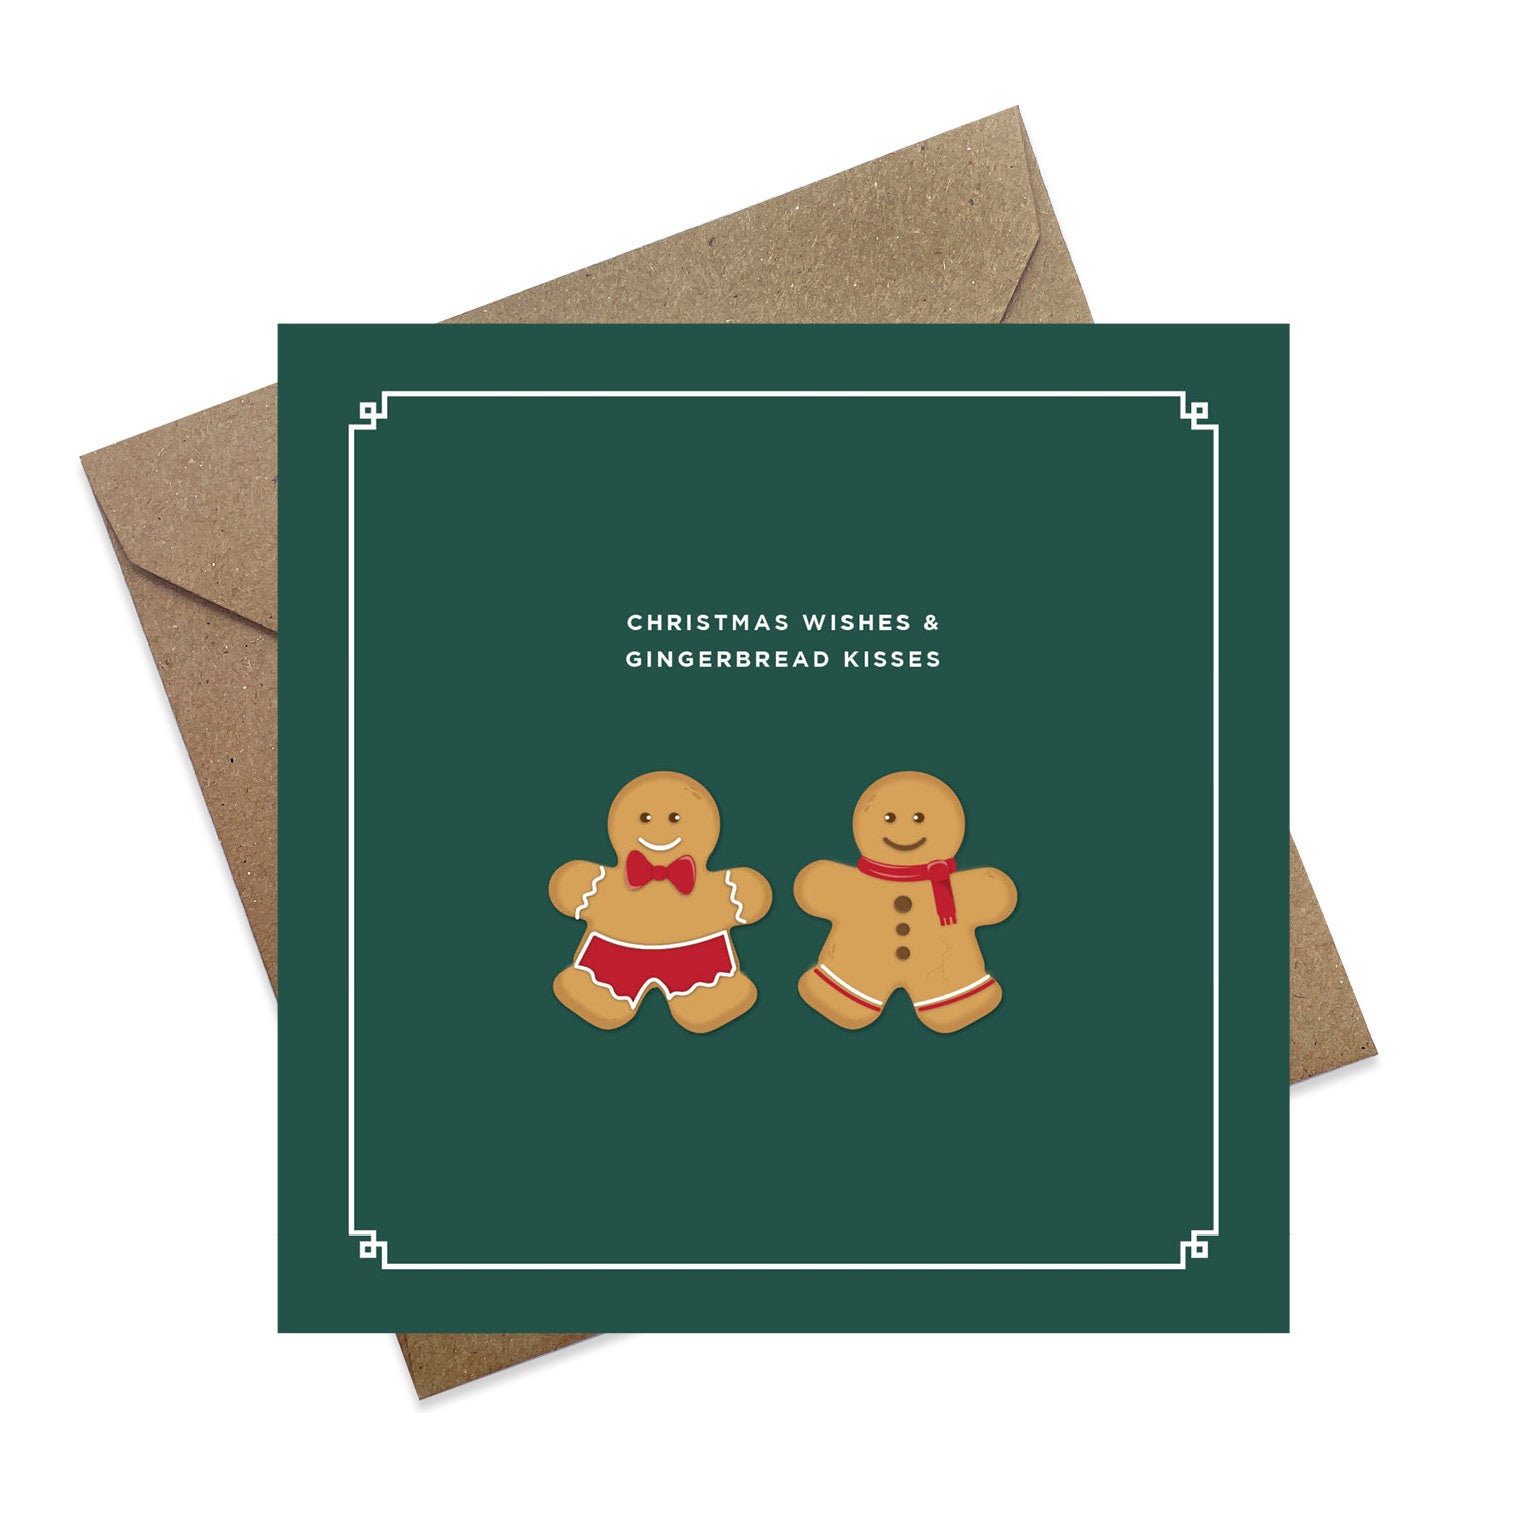 Christmas wishes and gingerbread kisses - gingerbread men